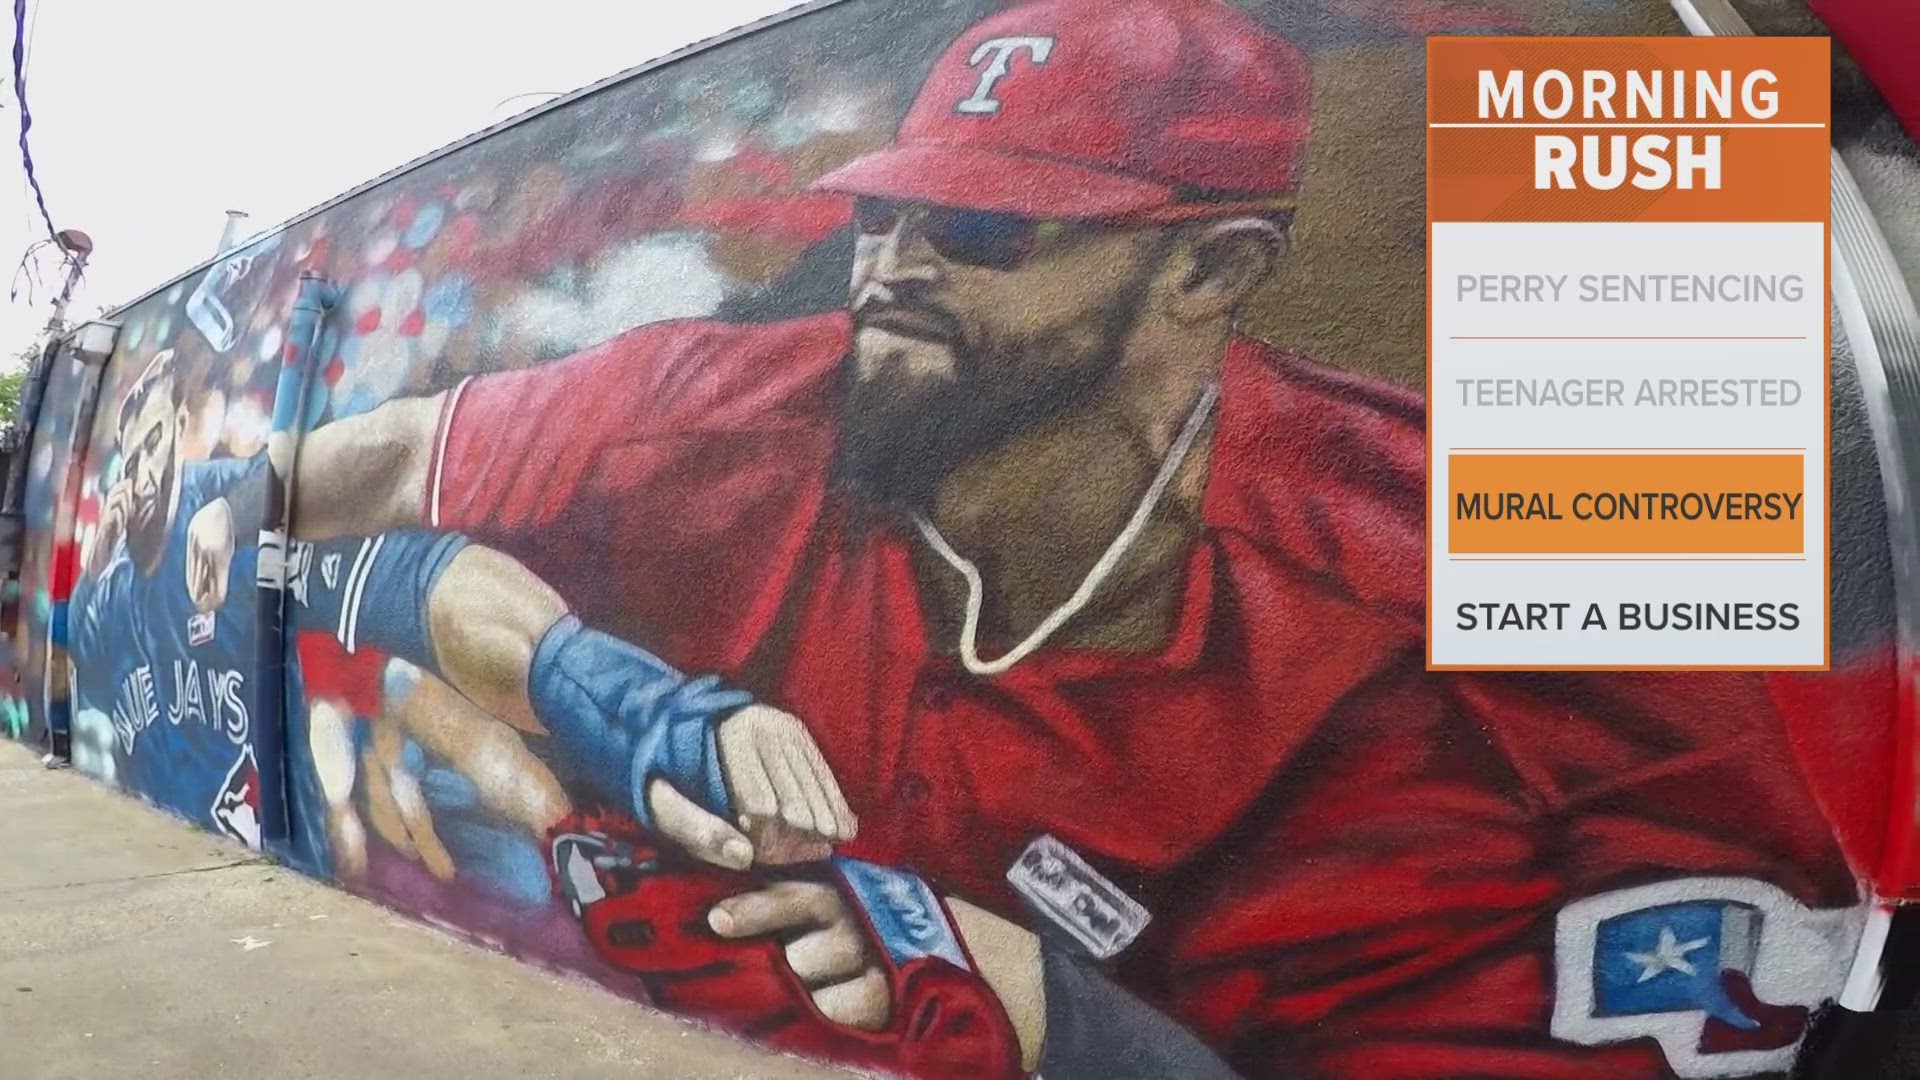 The mural shows the moment in 2016 when then-Texas Ranger second baseman Odor lost his temper over bat flips and aggressive slides from the Toronto Blue Jays.